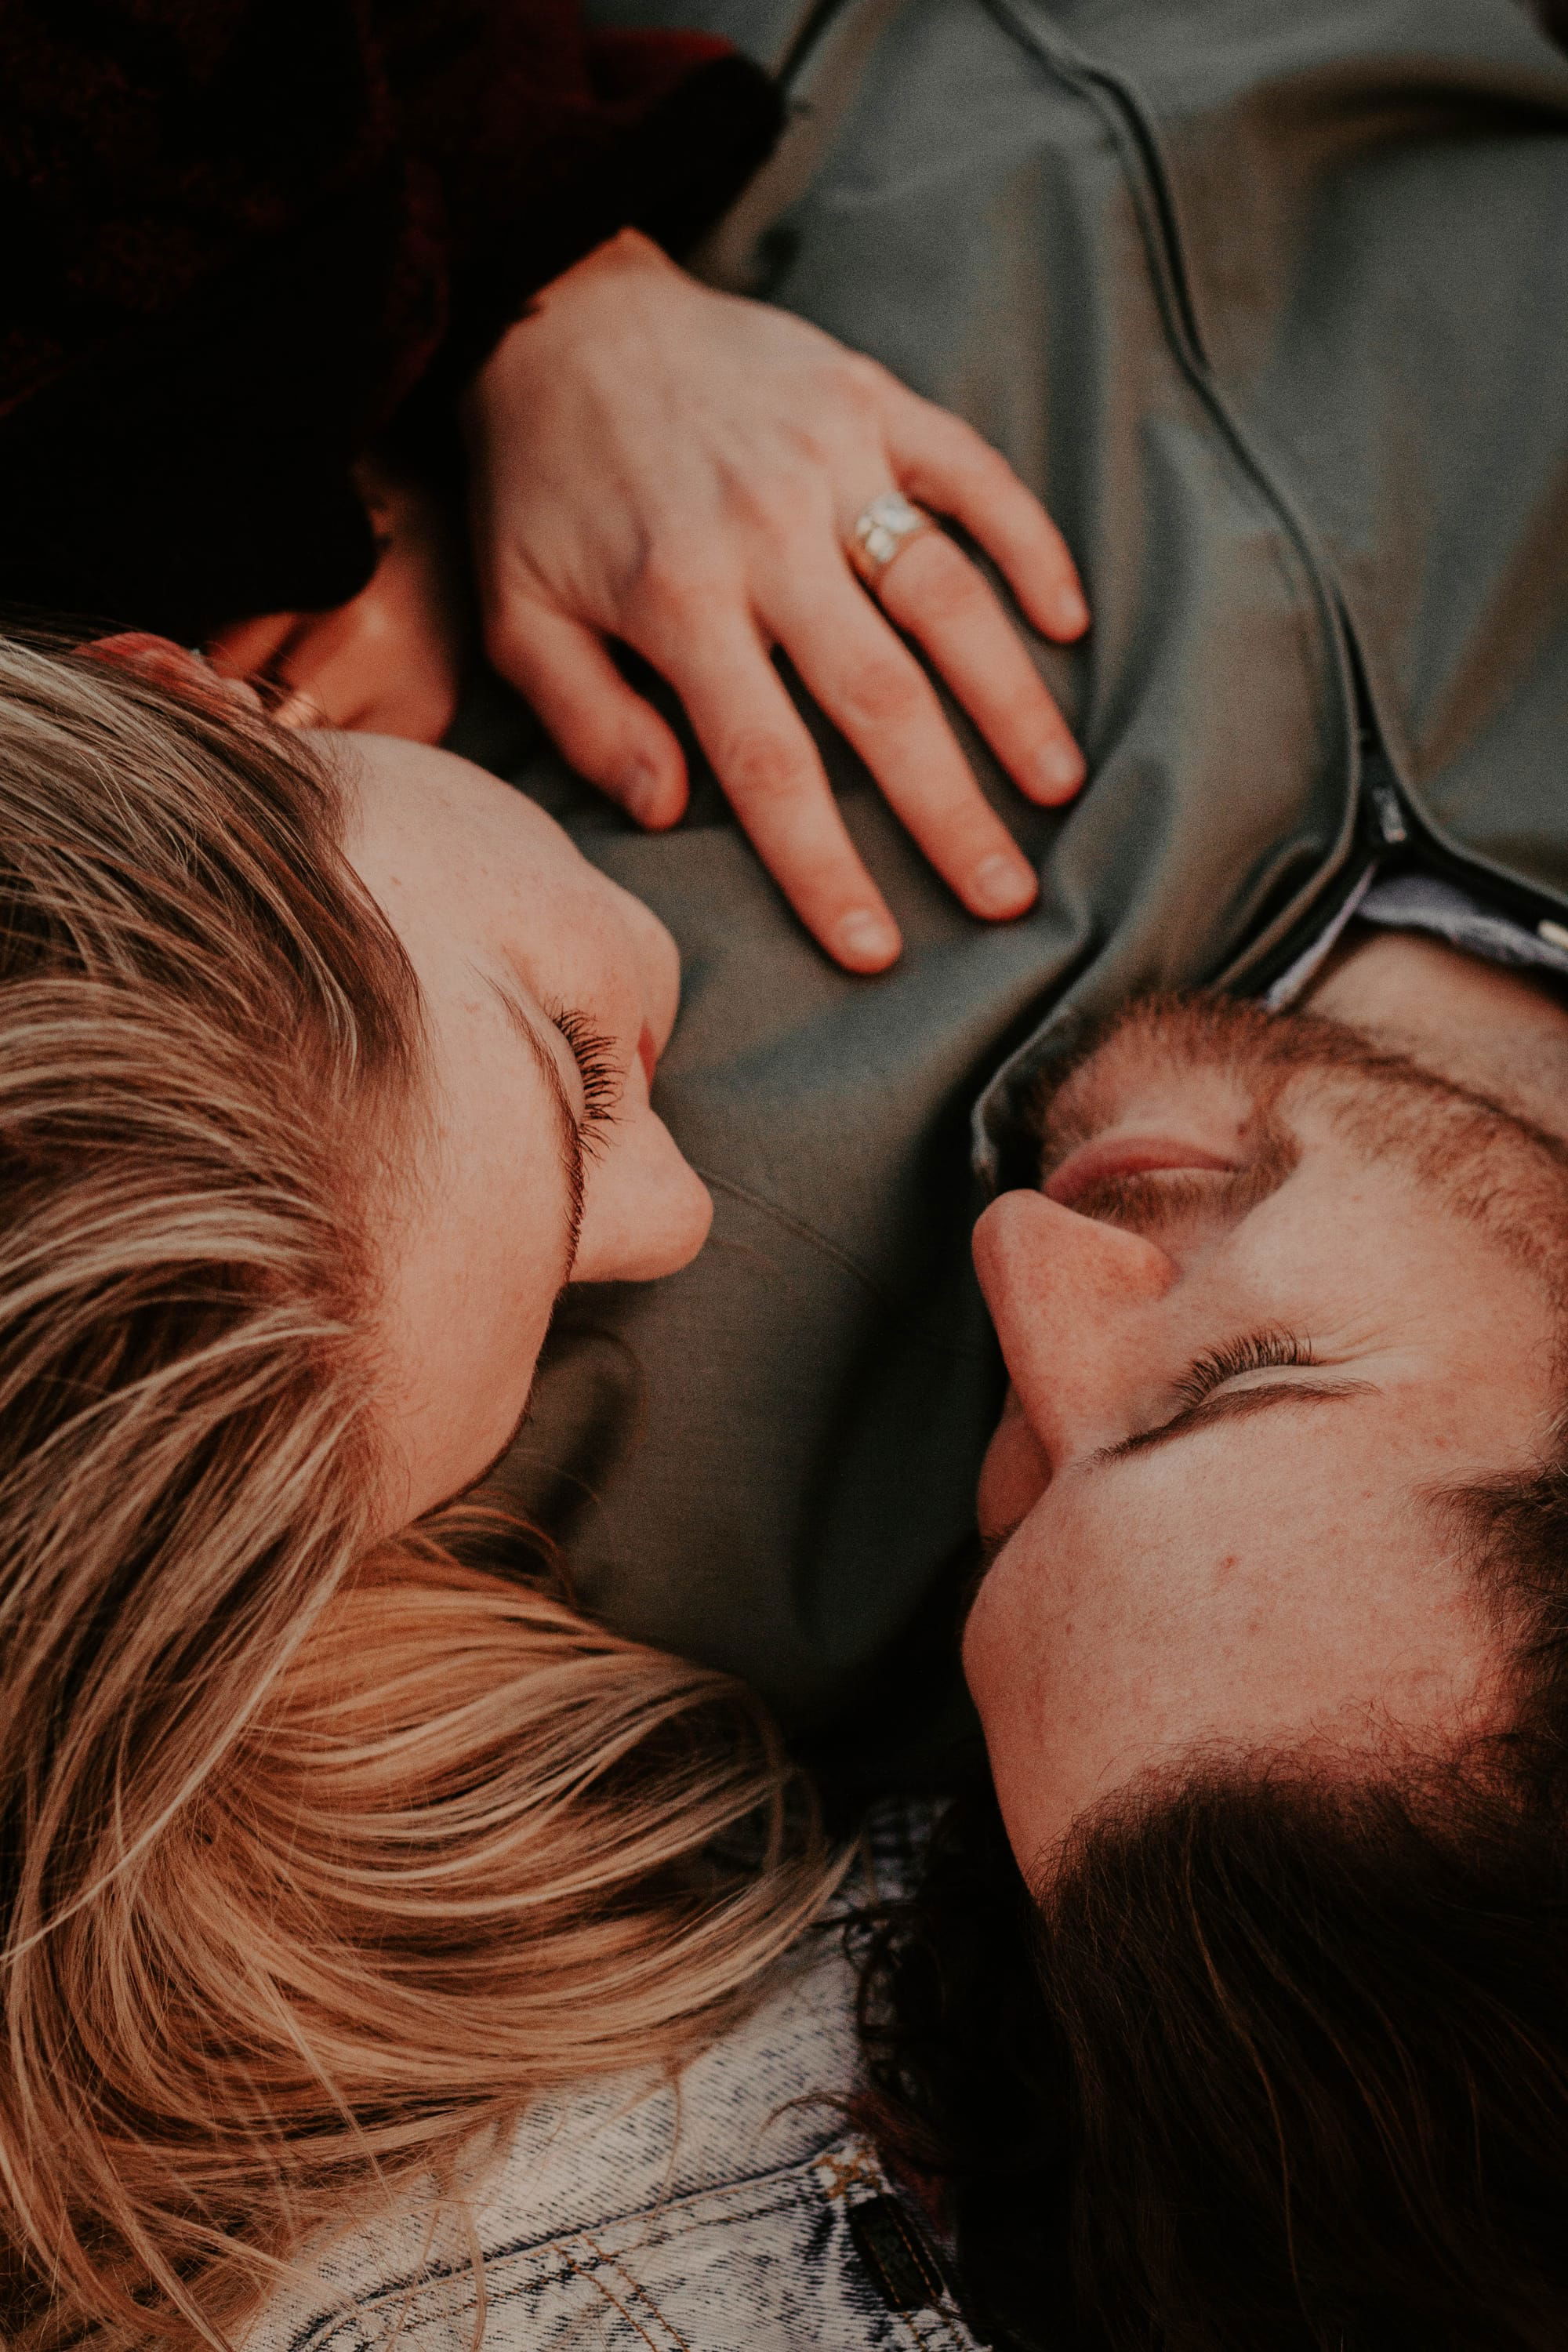 5 Simple ways to improve your intimate relationships